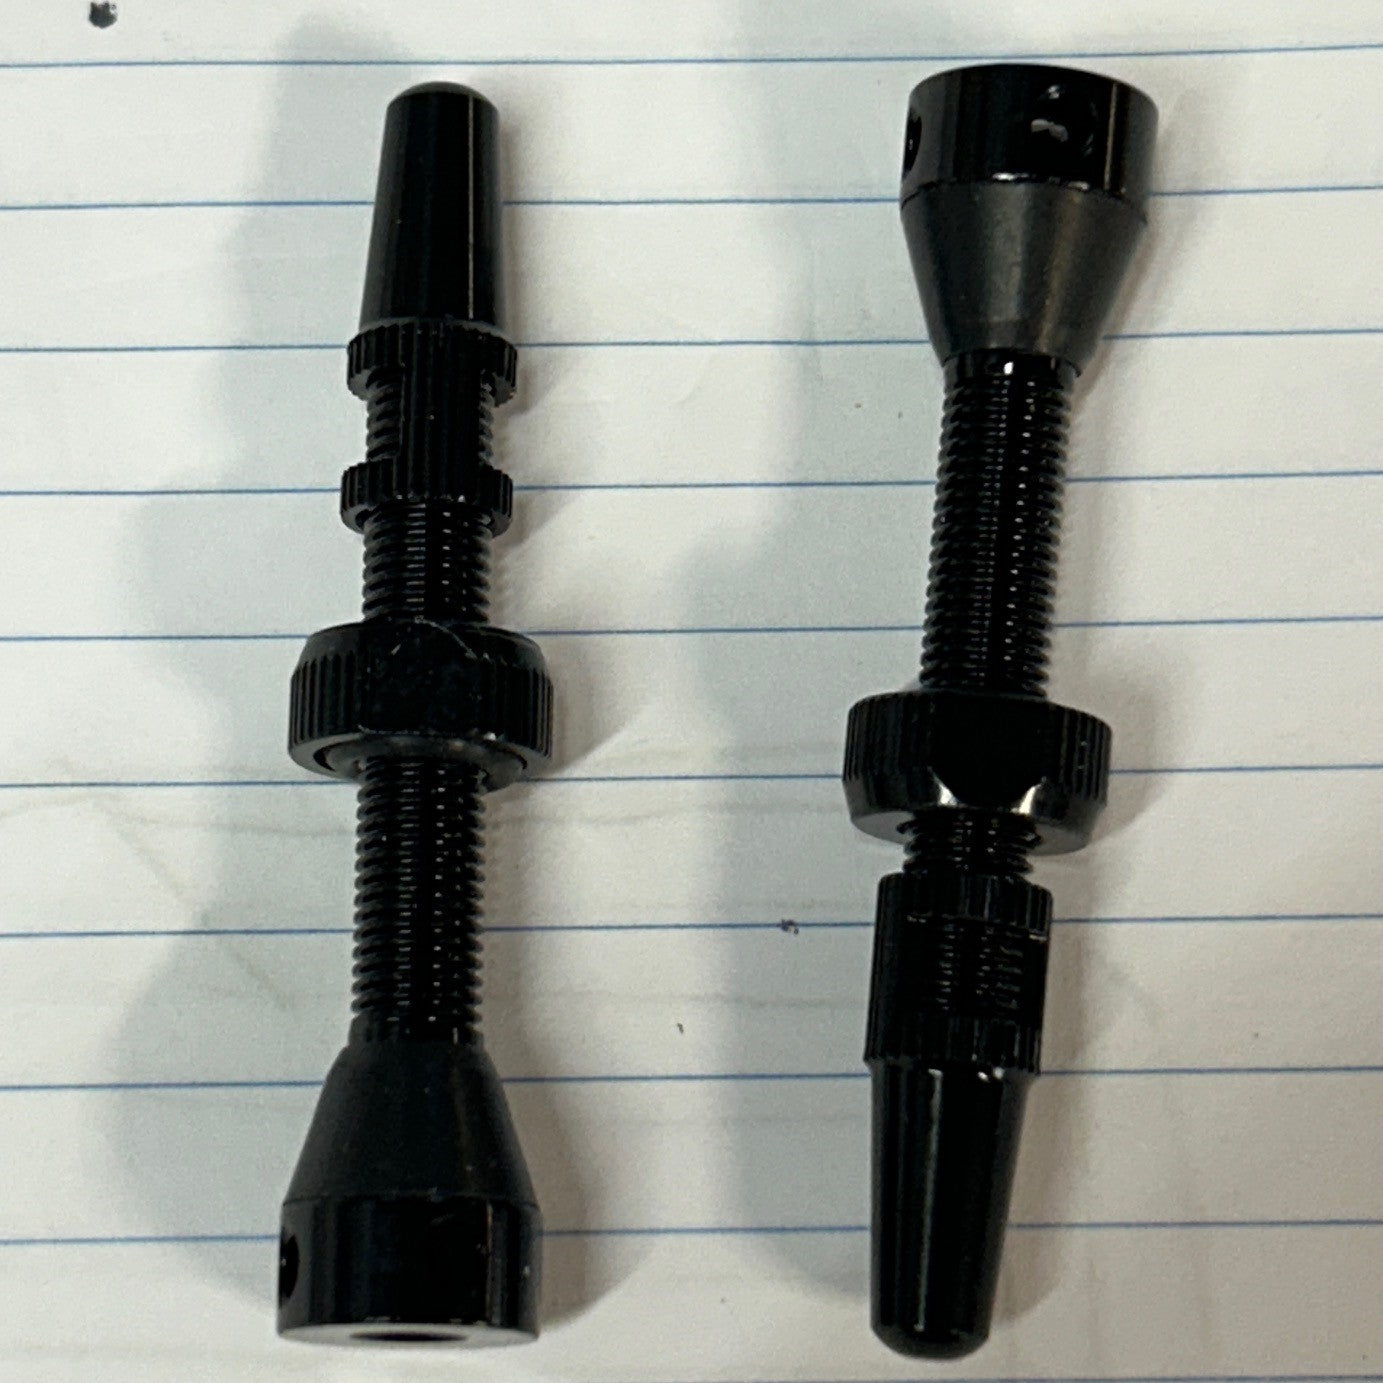 Seal-It Tubeless Valves - One pair